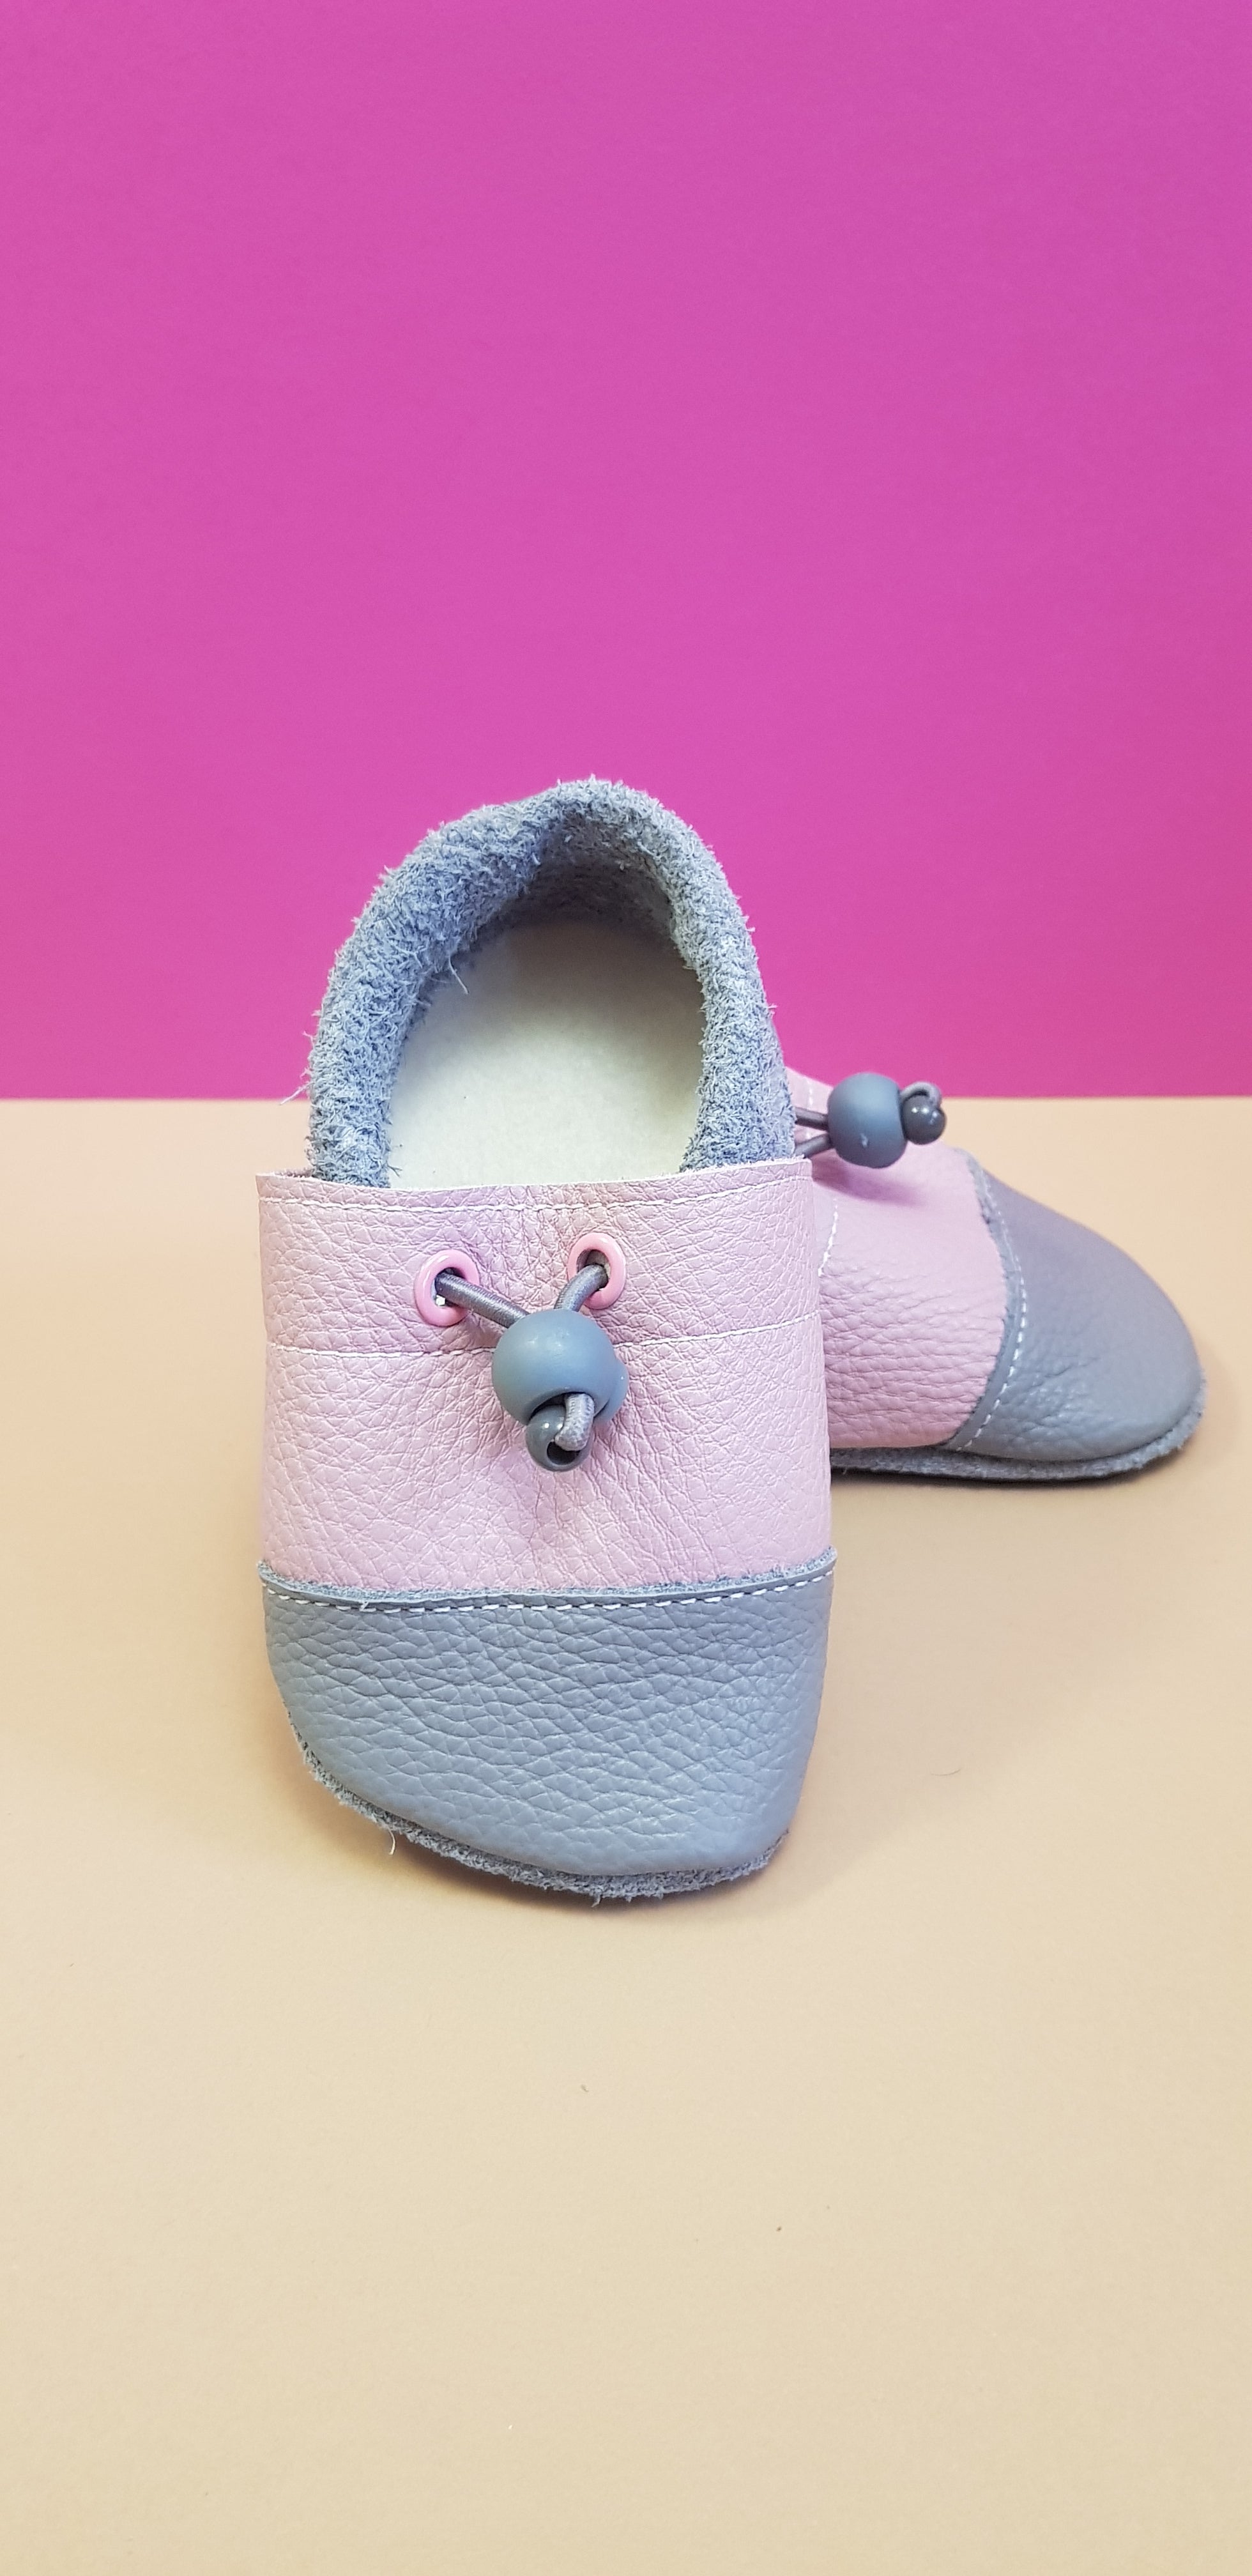 Pink and Grey Nohatka soft sole booties/slippers for babies and toddler, anatomically shaped from soft leather with adjustable ankle fastening and anti slip indoor/outdoor sole